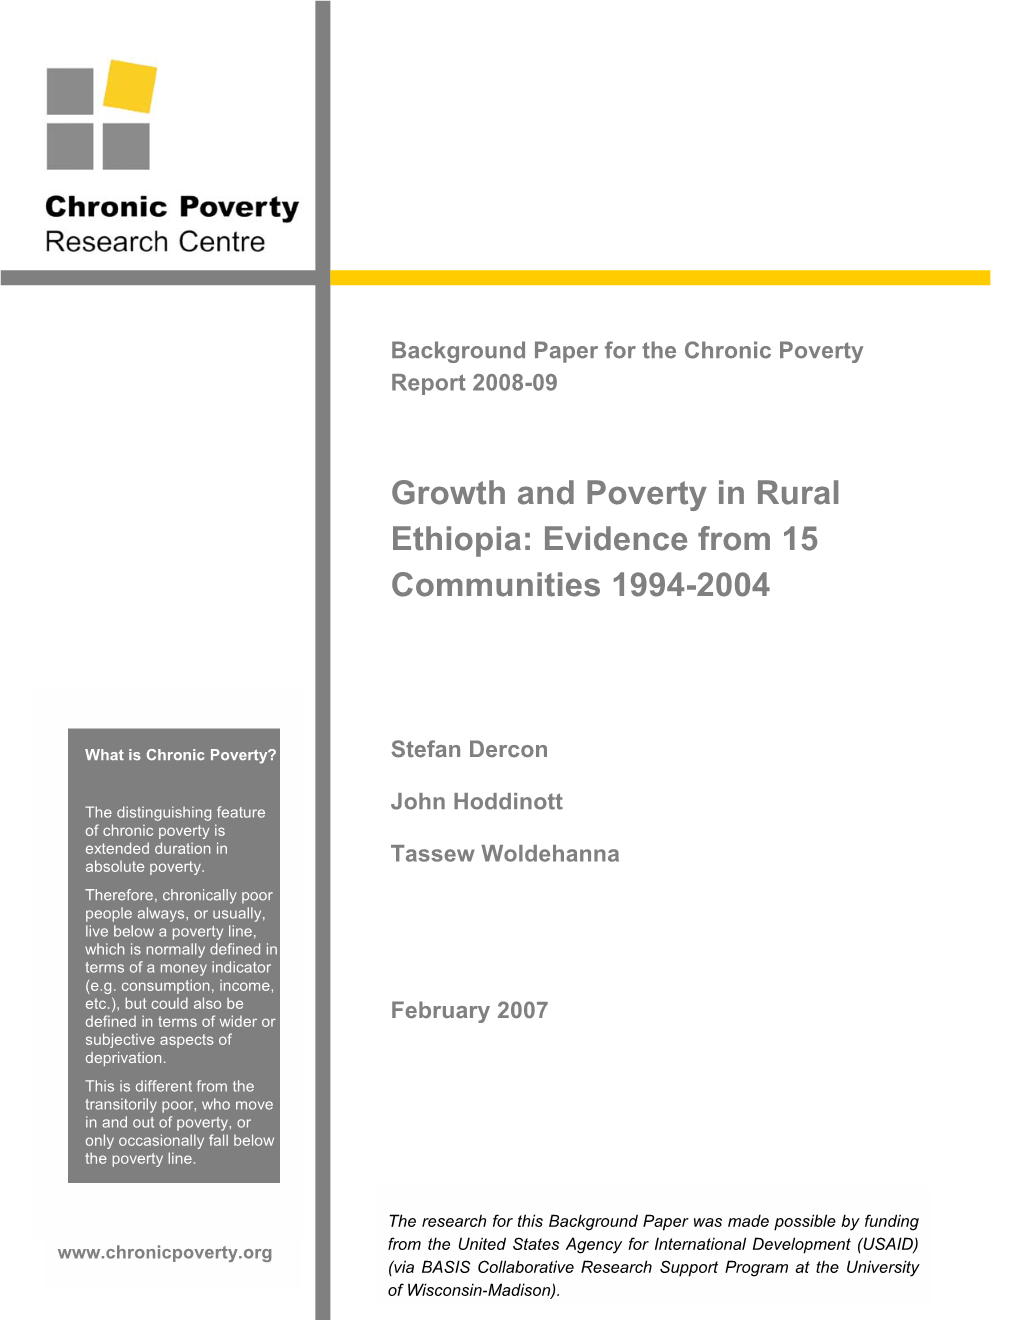 Growth and Poverty in Rural Ethiopia: Evidence from 15 Communities 1994-2004